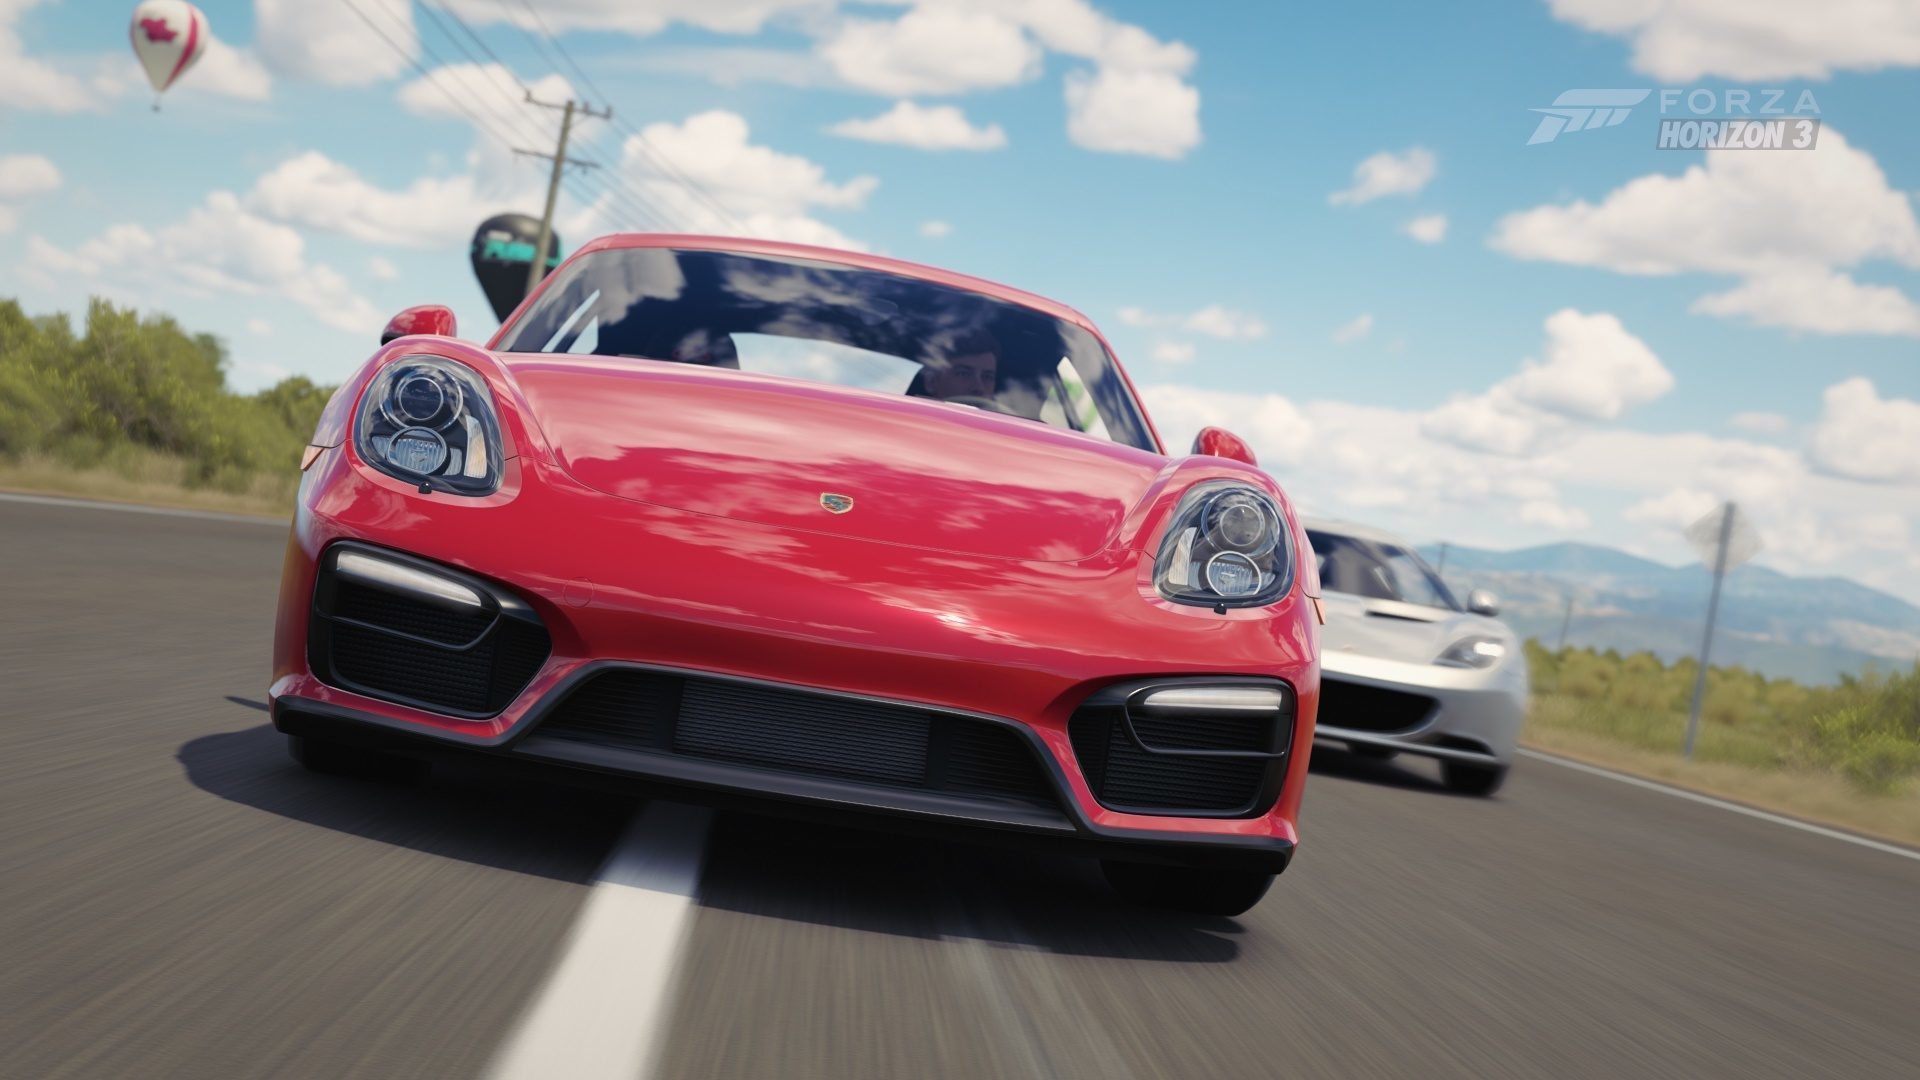 Secure the Porsche Cayman GTS in This Weekend's Forzathon1920 x 1080